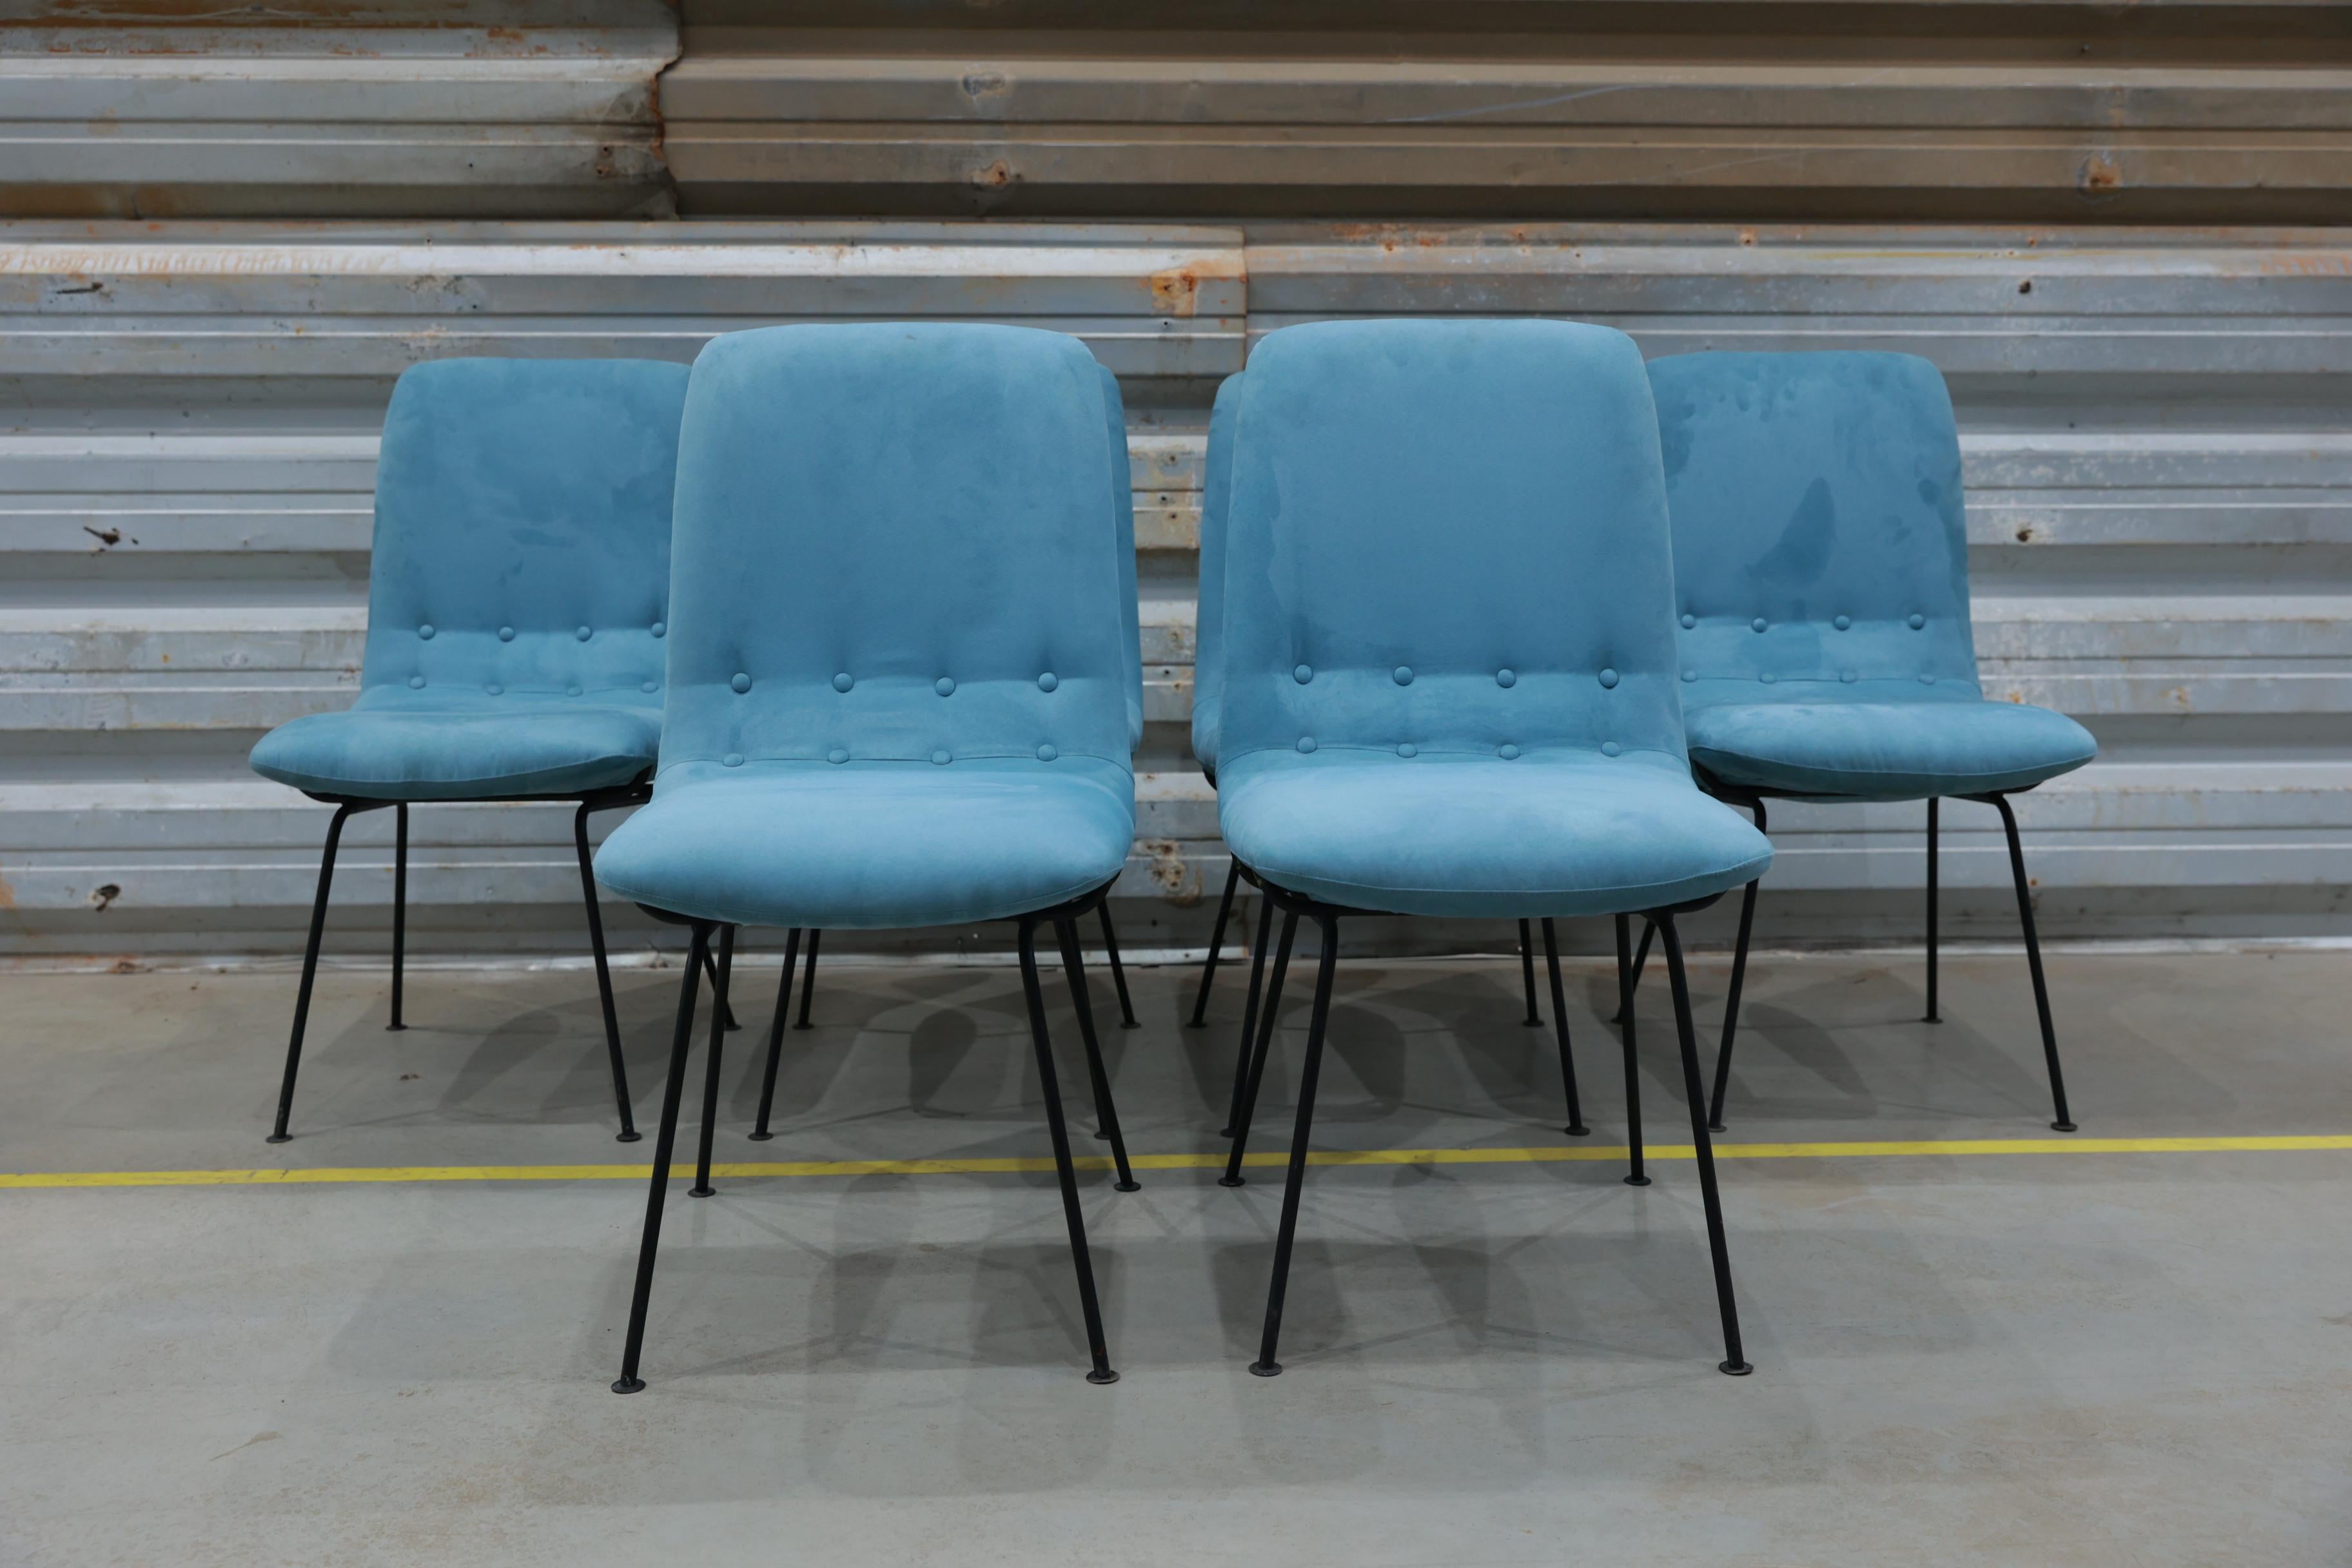 Available today, these Mid-Century Modern chairs in Fabric and Metal designed by Carlo Hauner in the fifties are beautiful!!

The one of a kind set of six dining chairs was designed by Carlo Hauner for Moveis Artesanais, the designer’s first company